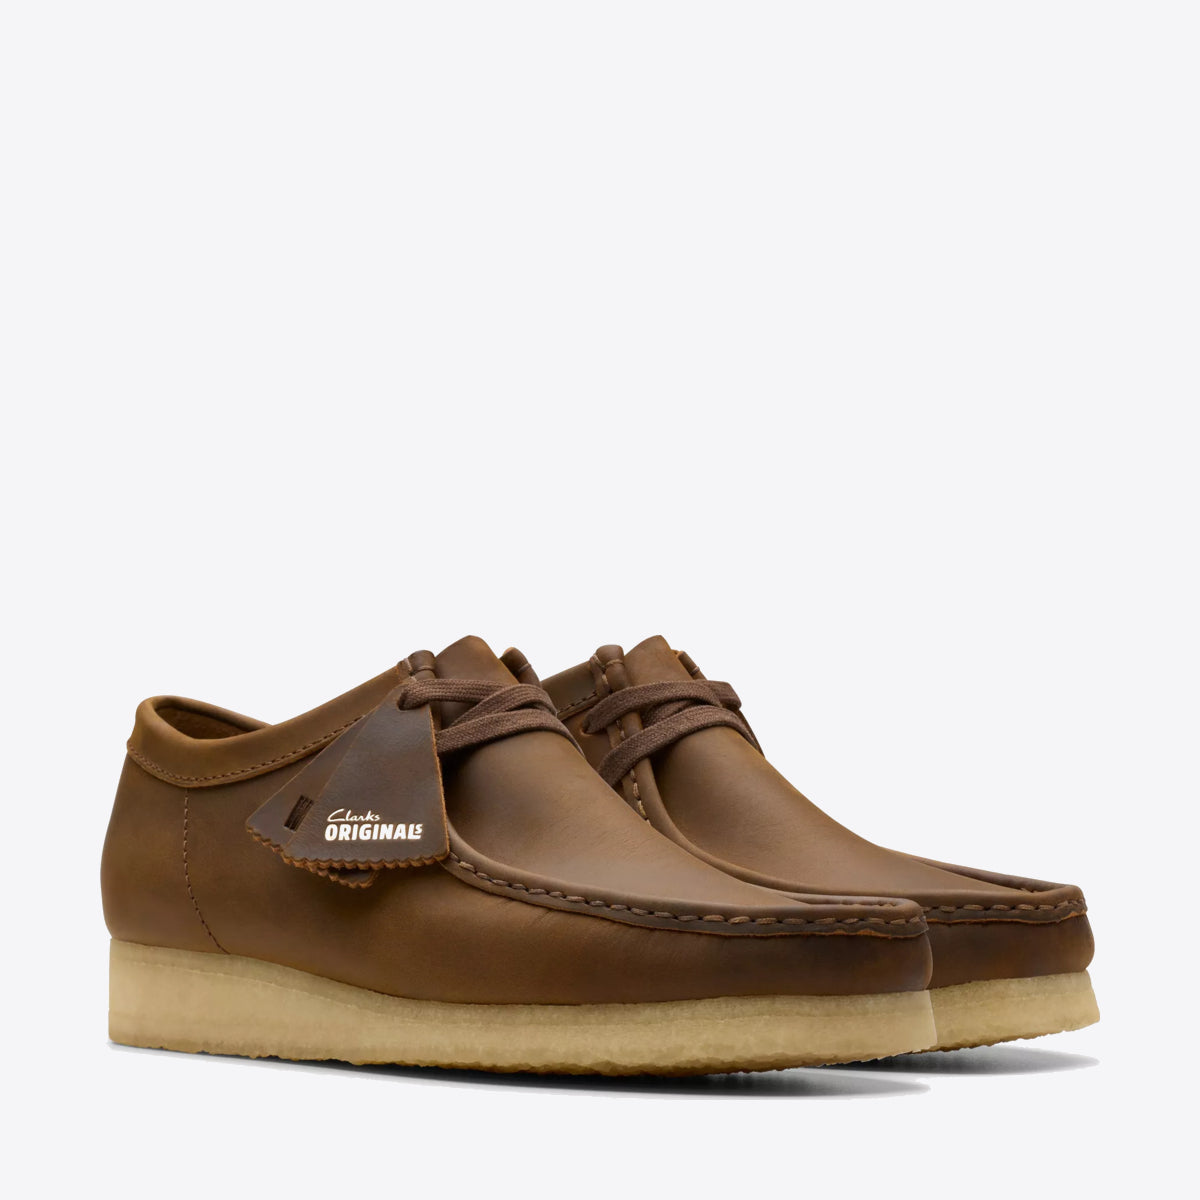 CLARKS Wallabee Shoe Suede Beeswax - Image 4